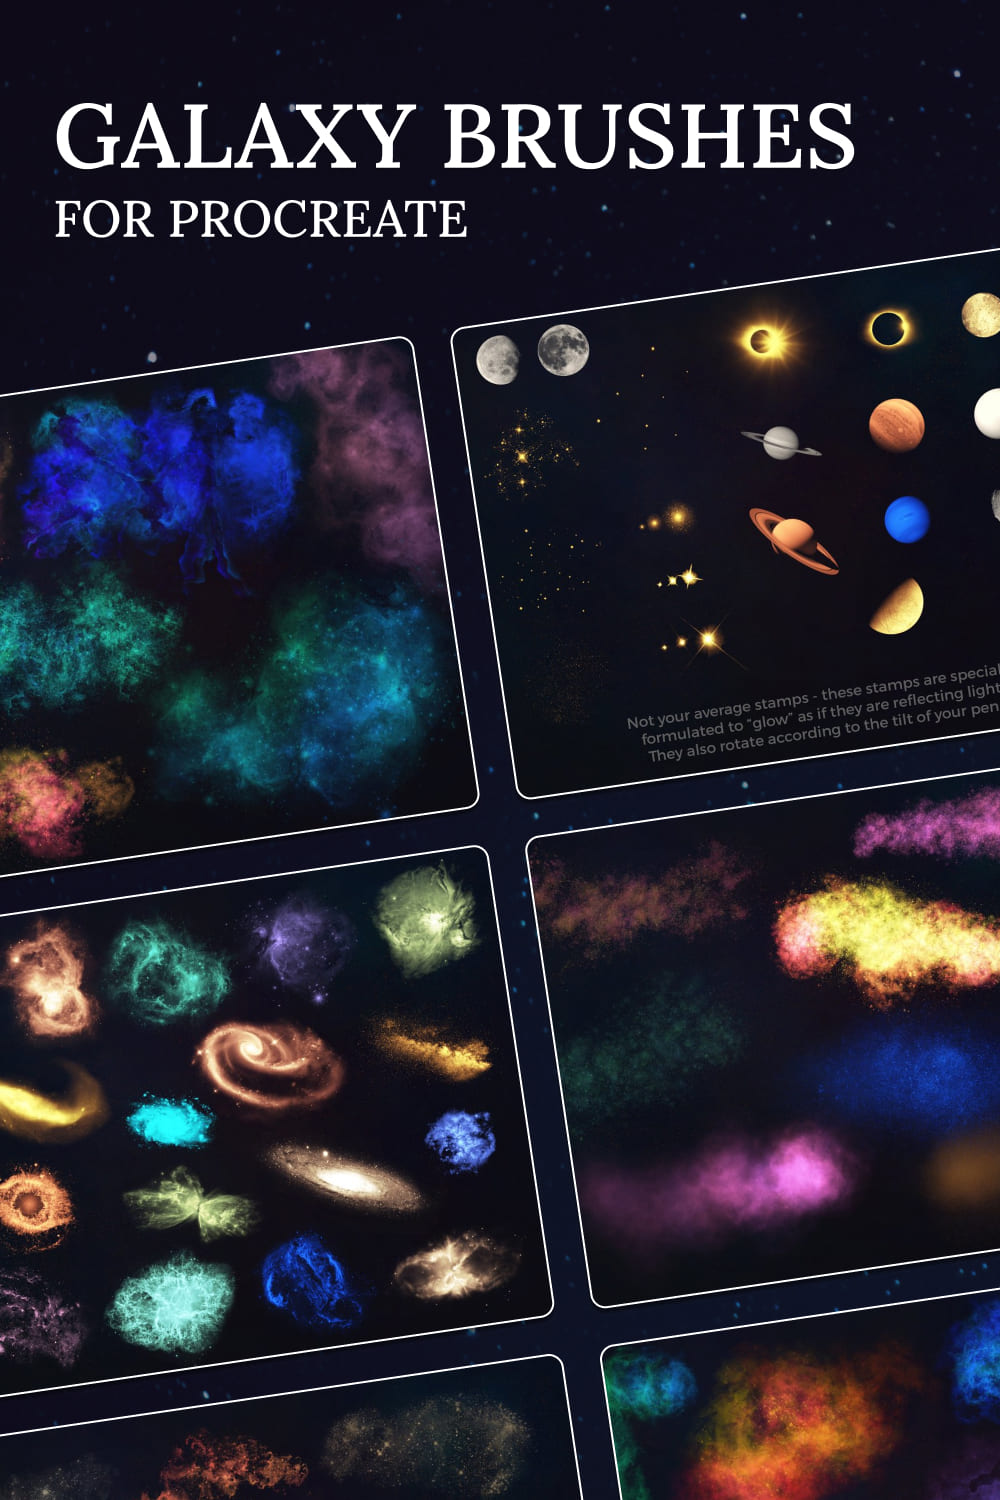 Galaxy Brushes for Procreate - pinterest image preview.